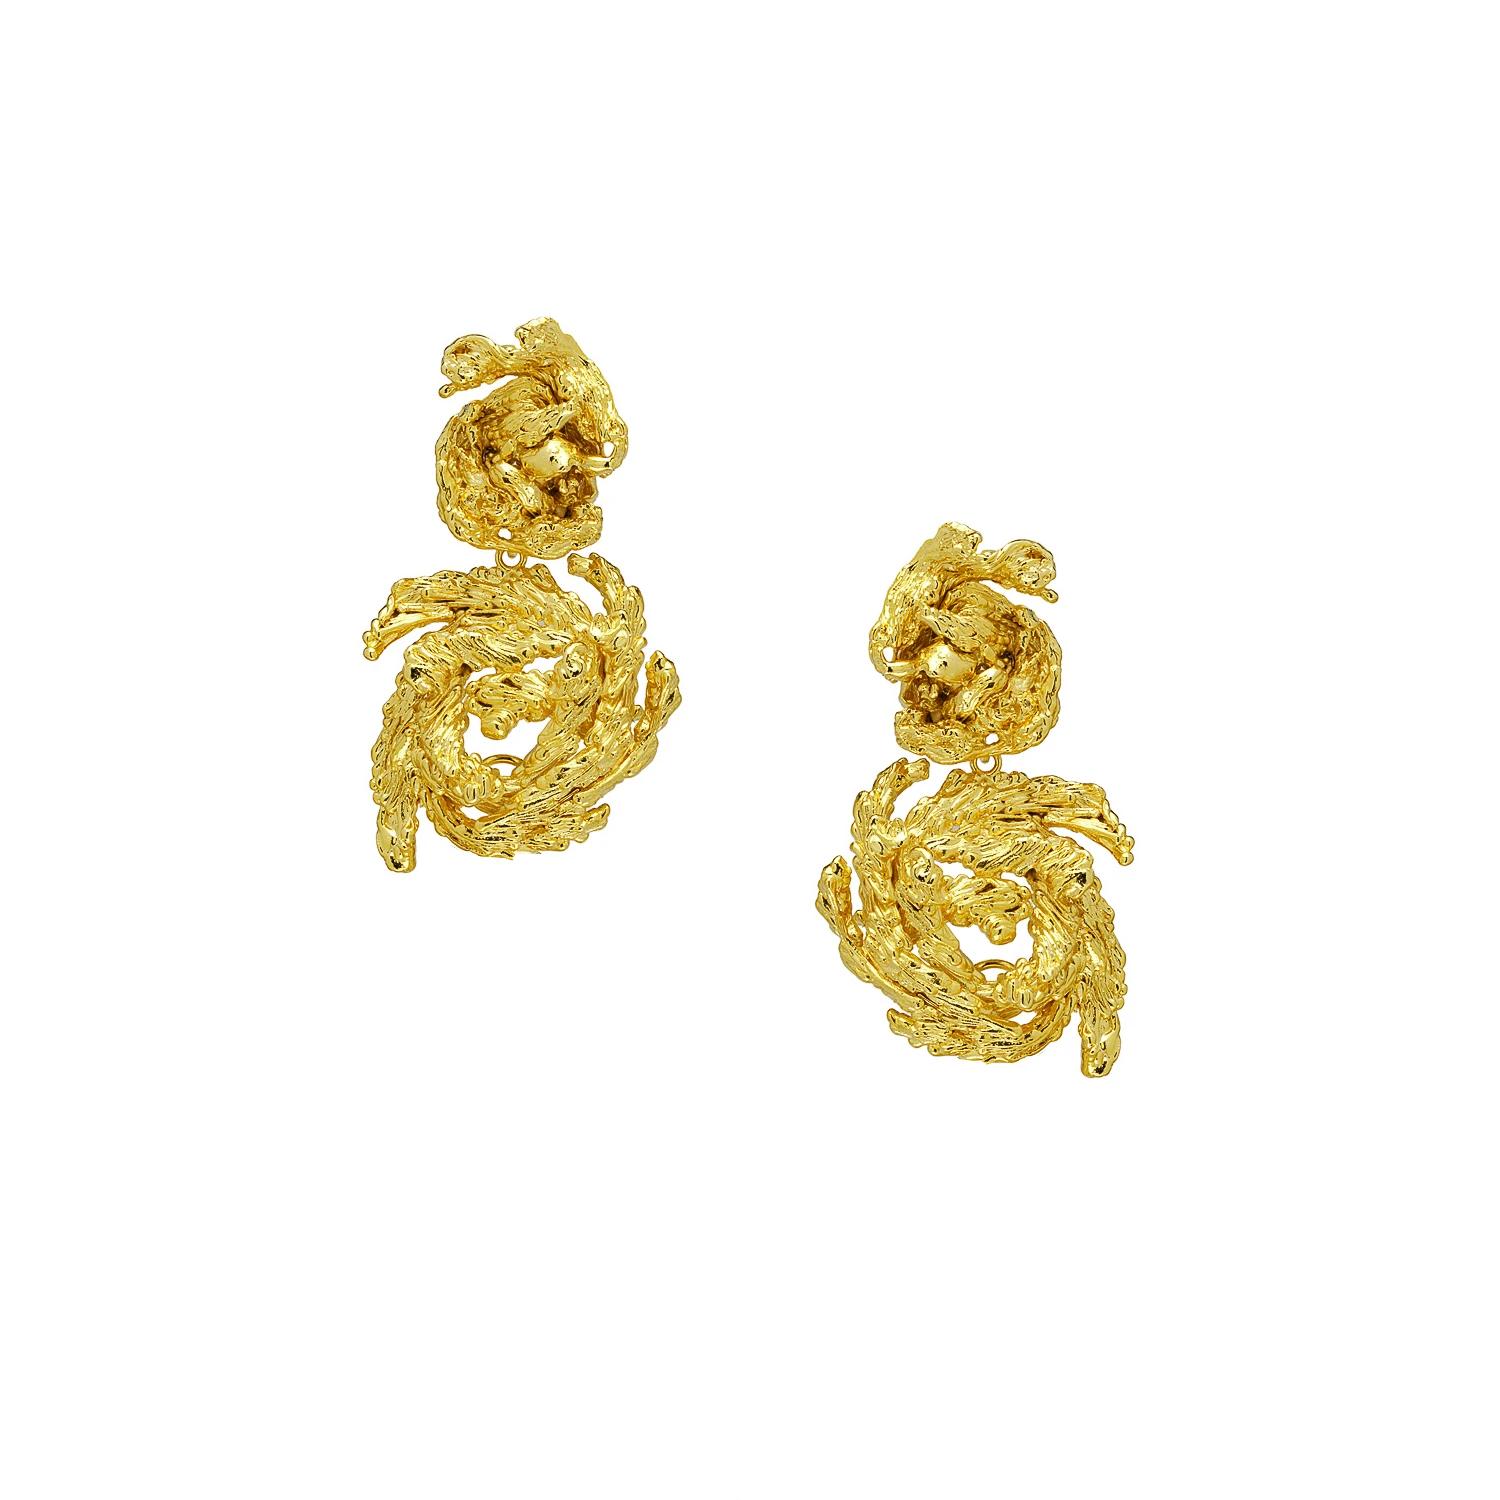 Barbosa ‘Sahara’ Modular Earrings in Vermeil In New Condition For Sale In New York, NY